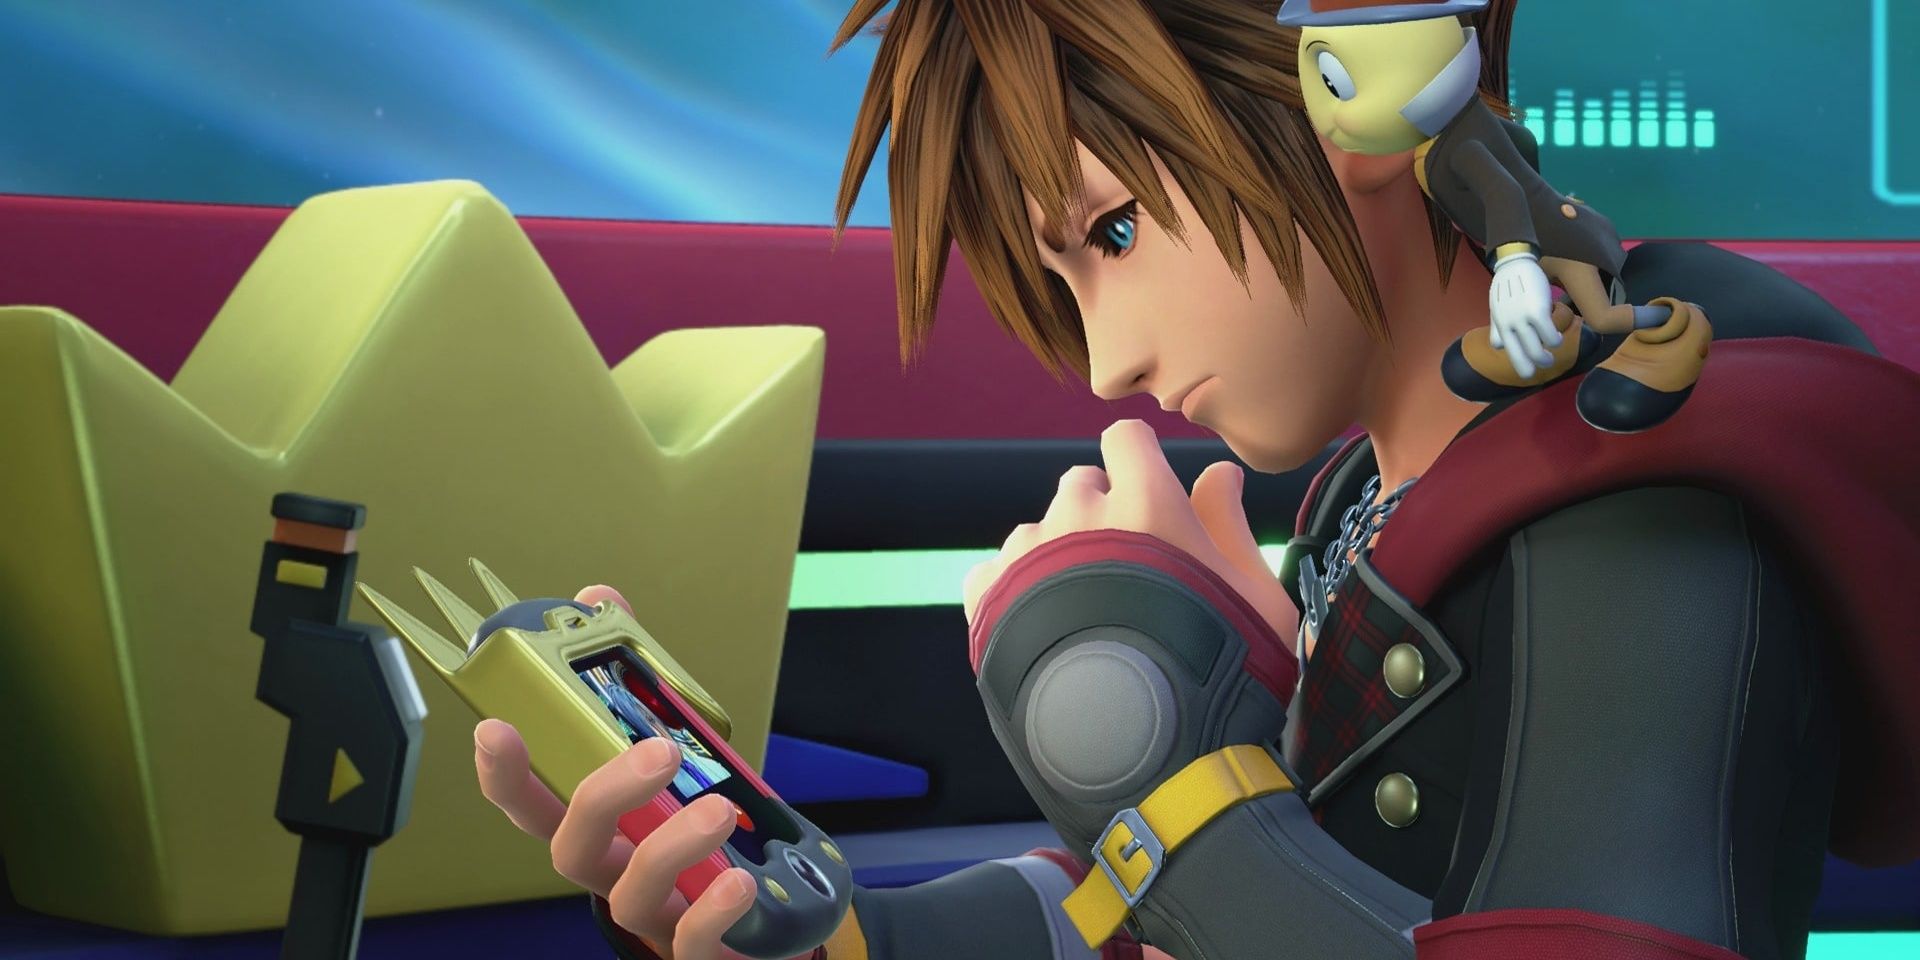 Sora using the Gummi Phone with Jiminy Cricket on his shoulder